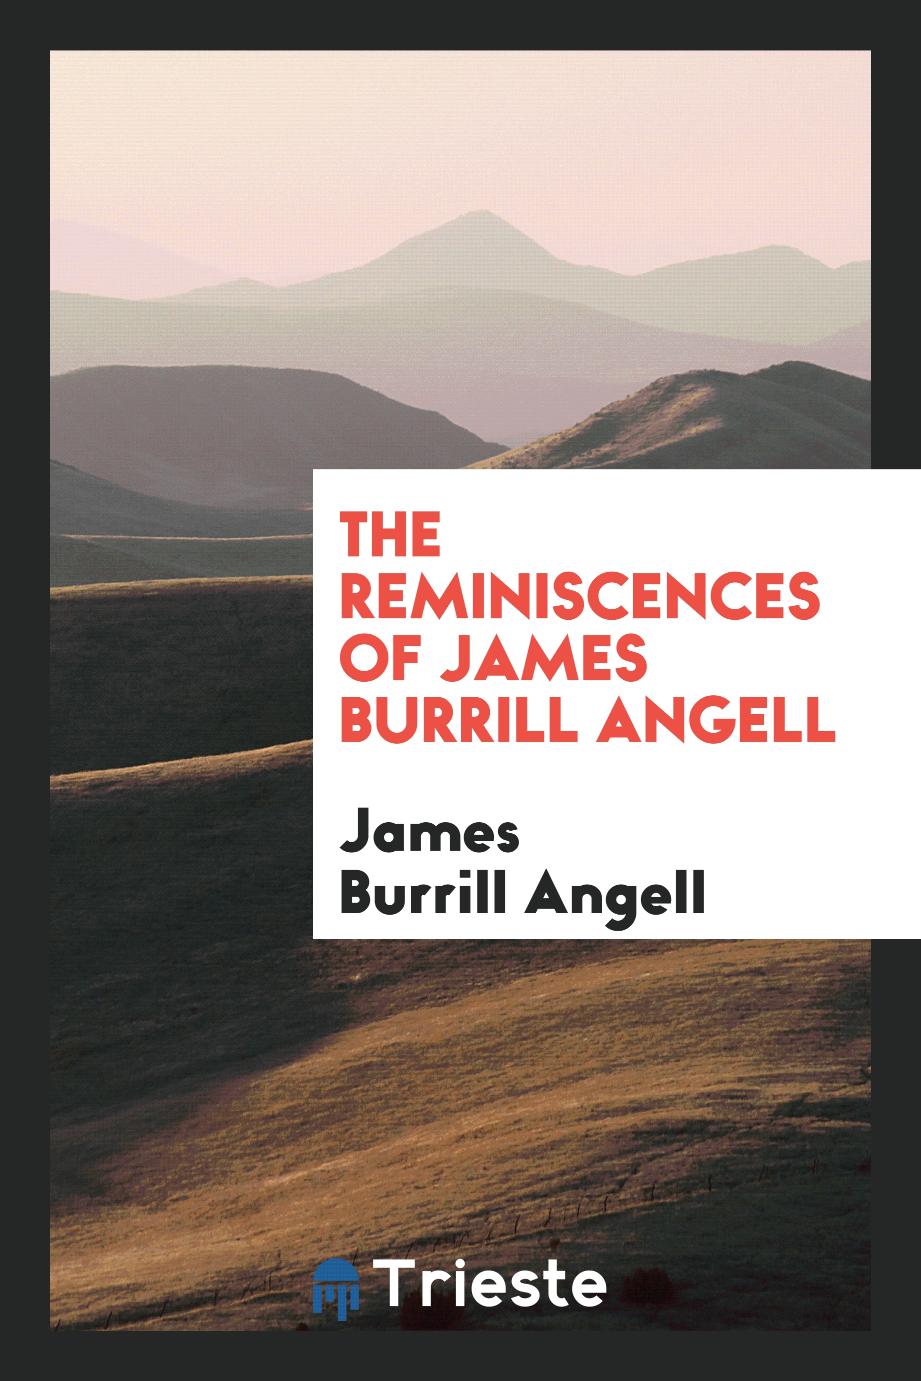 The reminiscences of James Burrill Angell